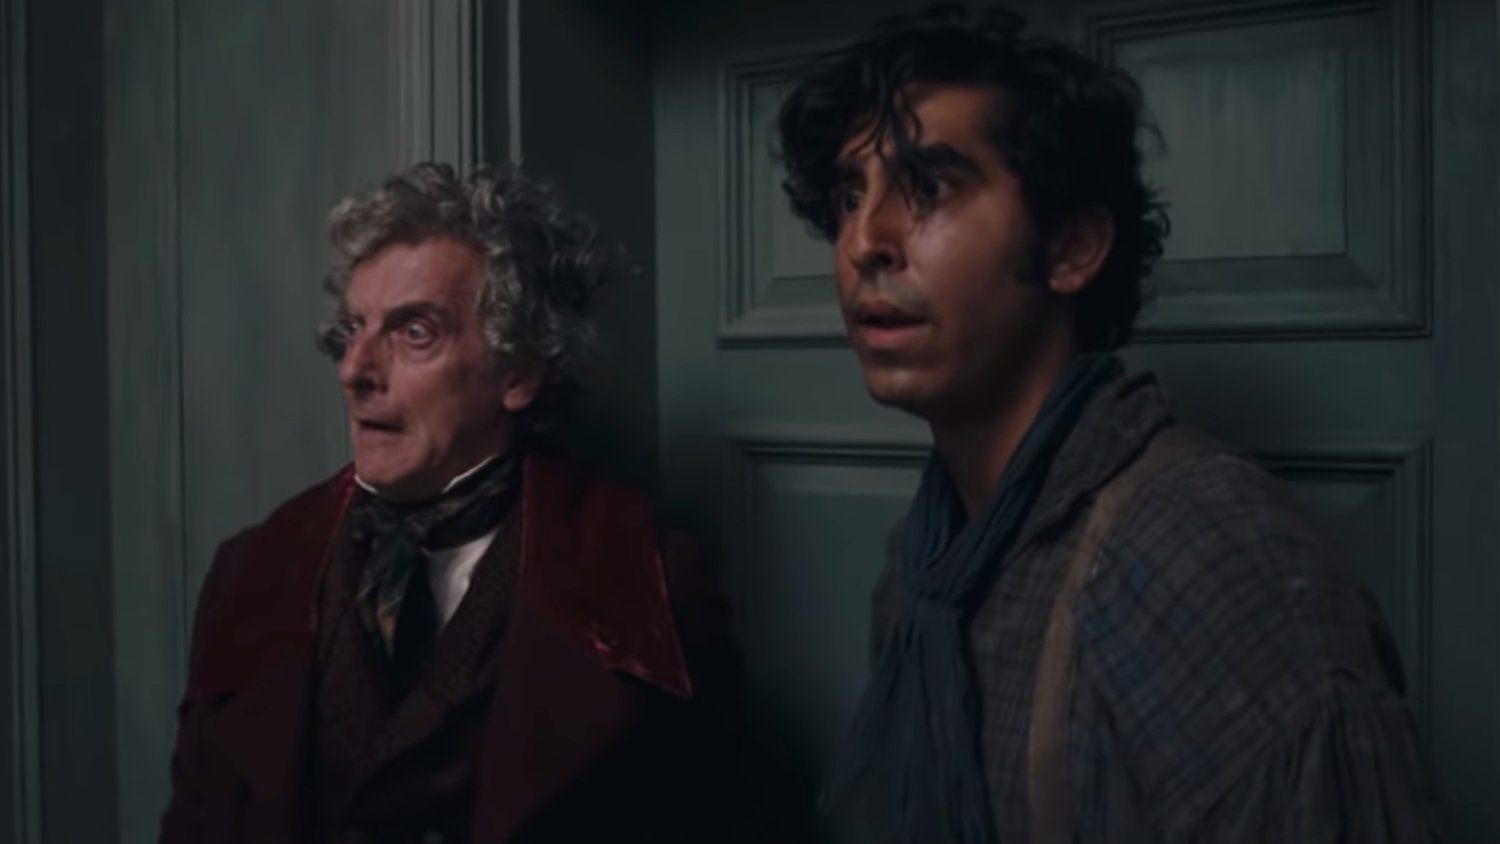 Delightfully Funny For THE PERSONAL HISTORY OF DAVID COPPERFIELD with Dev Patel